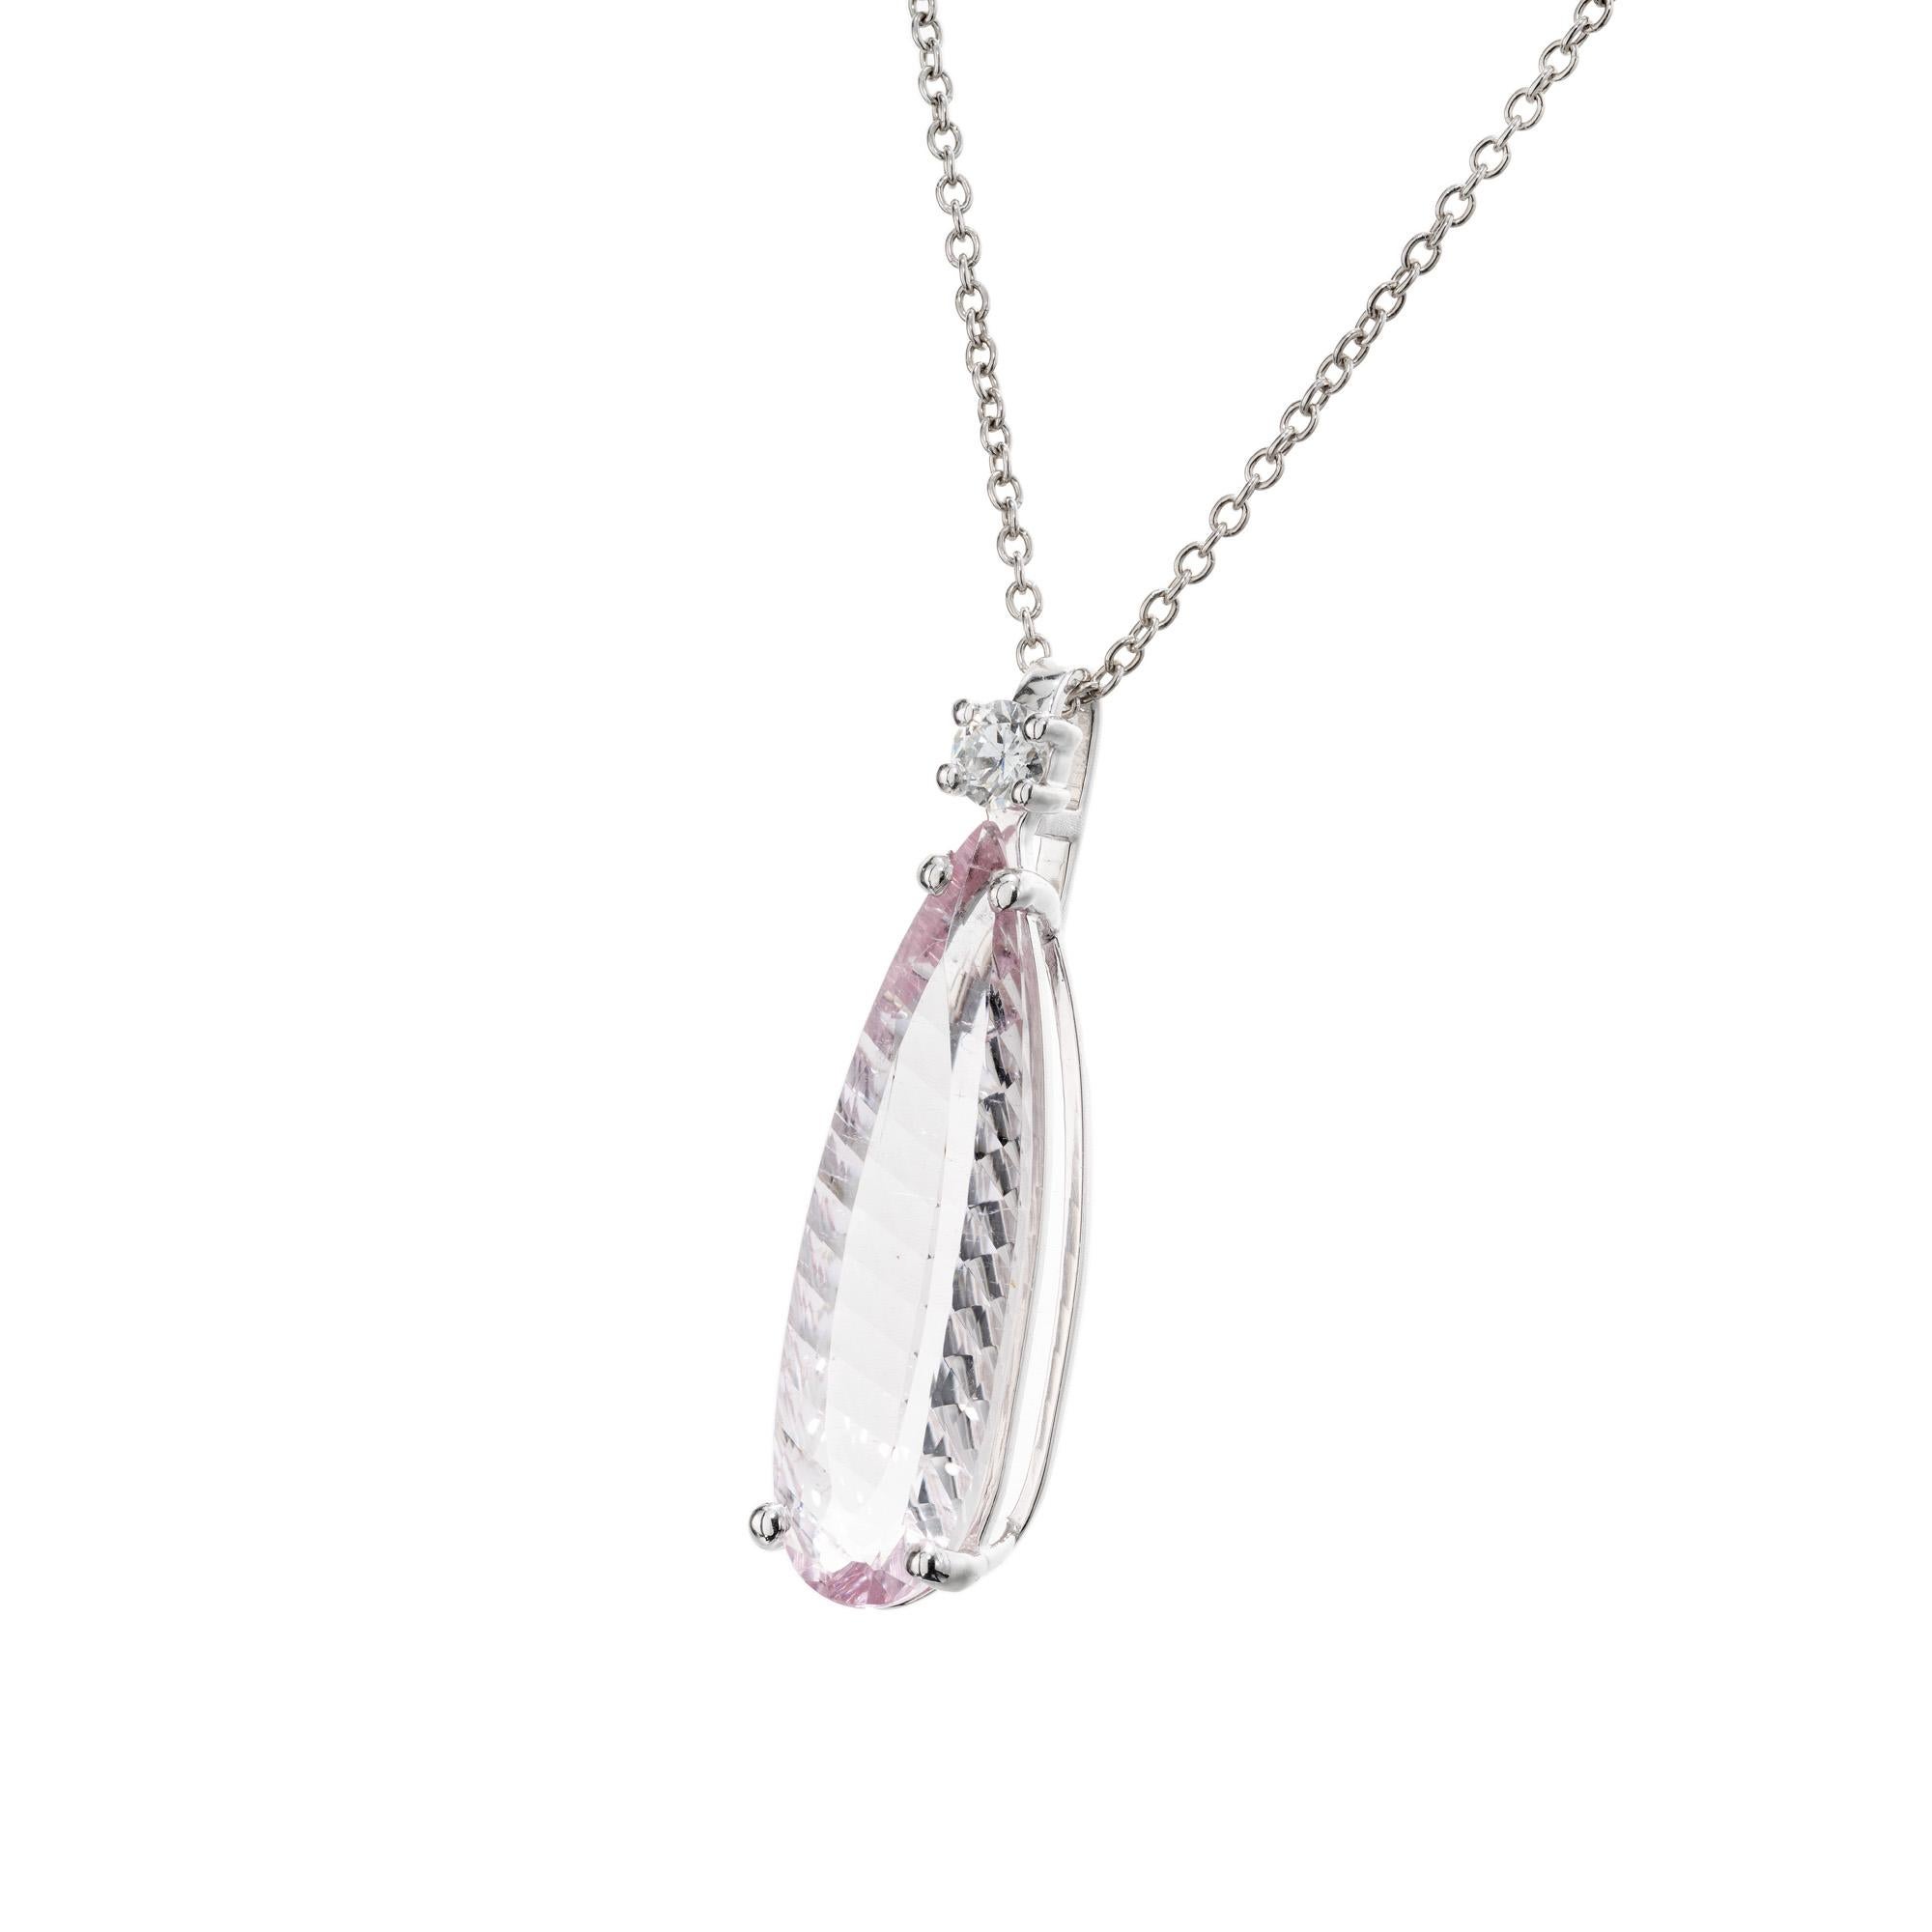 Exquisite Peter Suchy 6.56 Carat baby pink fantasy cut Tourmaline Diamond Platinum Pendant Necklace. This pendant necklace showcases a magnificent 6.56 carat tourmaline, radiating a captivating hue. Accented with a round brilliant cut diamond. The